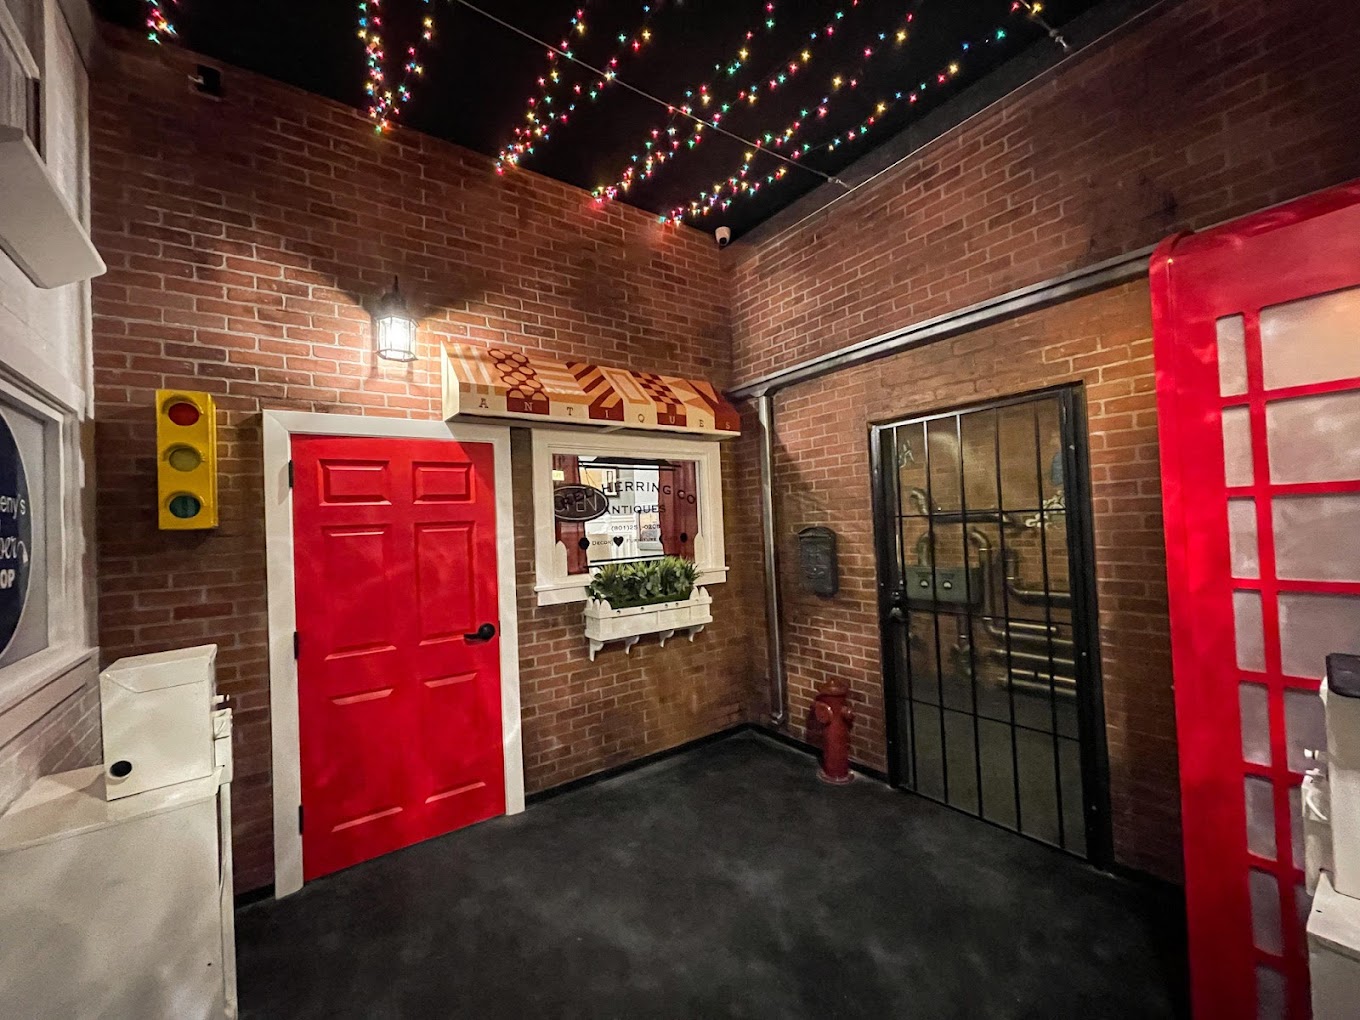 Escape Rooms: Spend An Evening With Friends